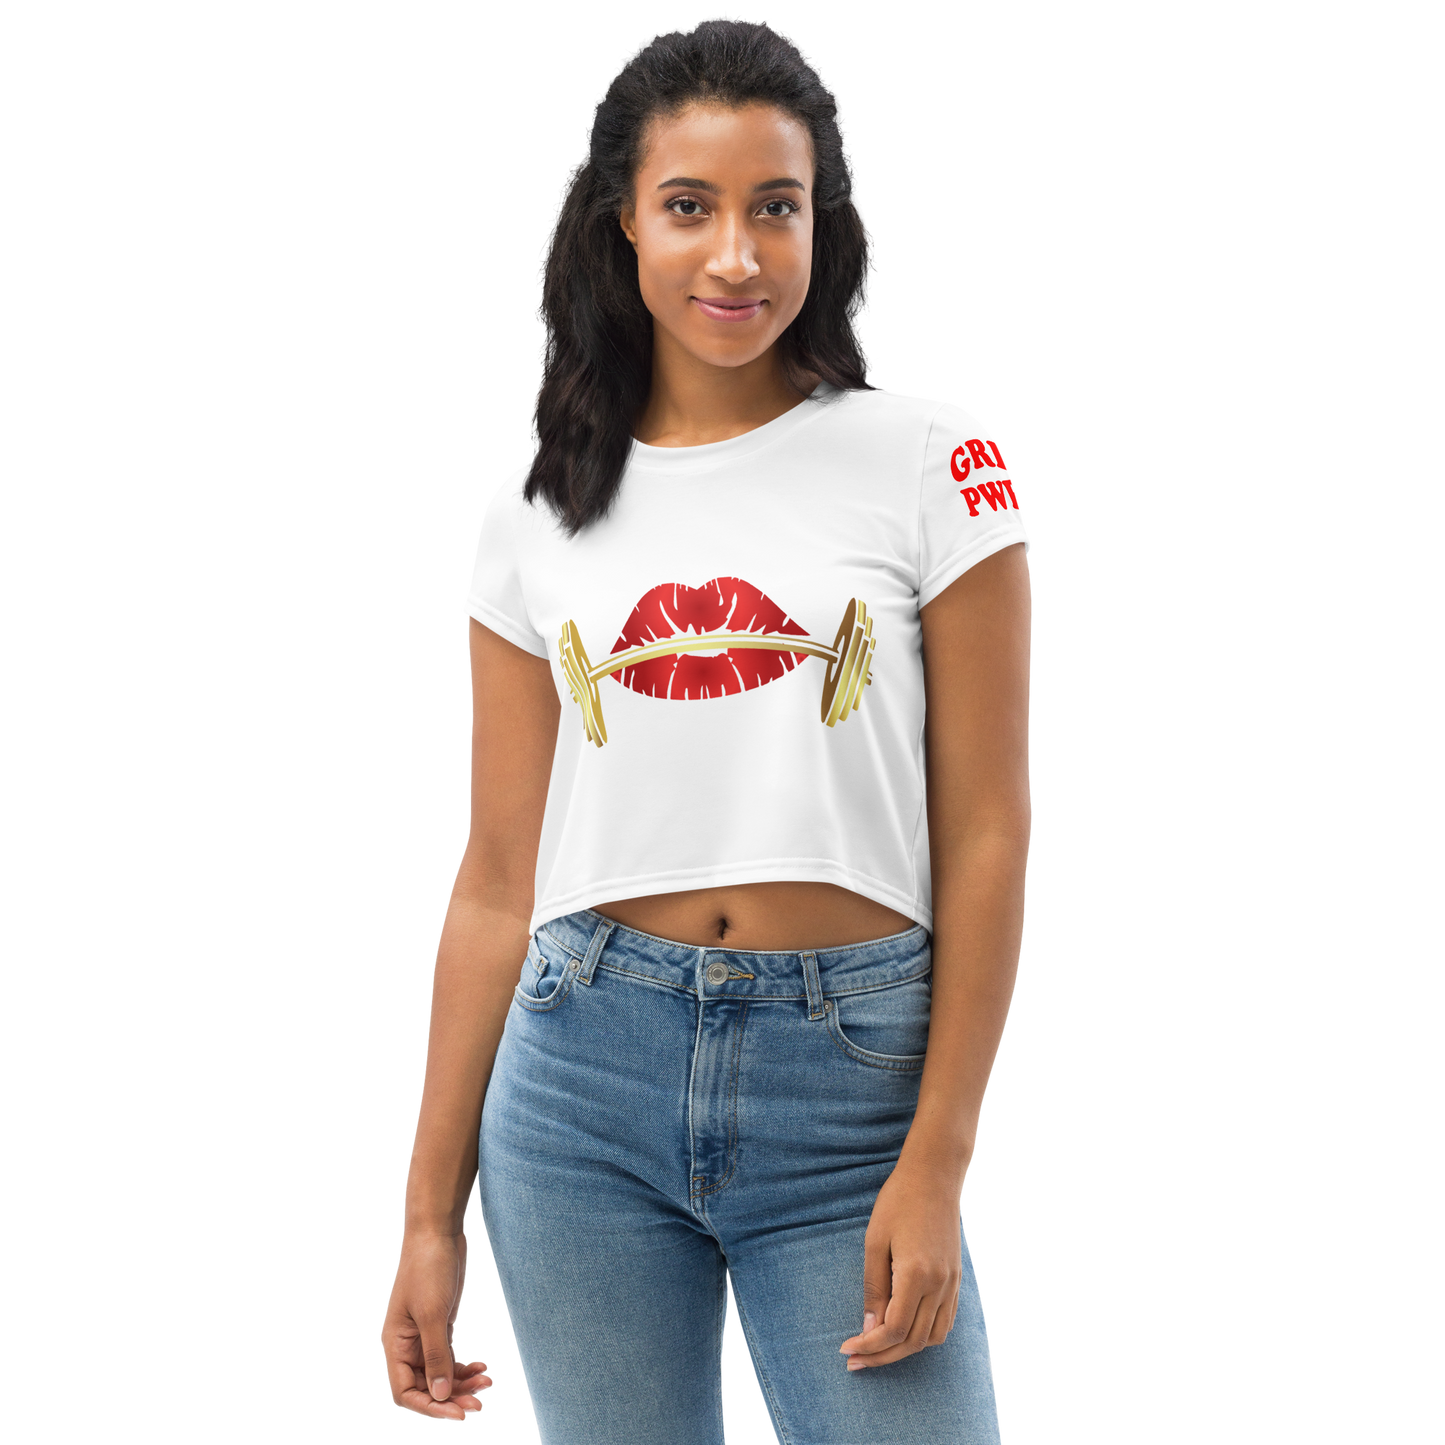 Signature GRL PWR All-Over Print Crop Tee